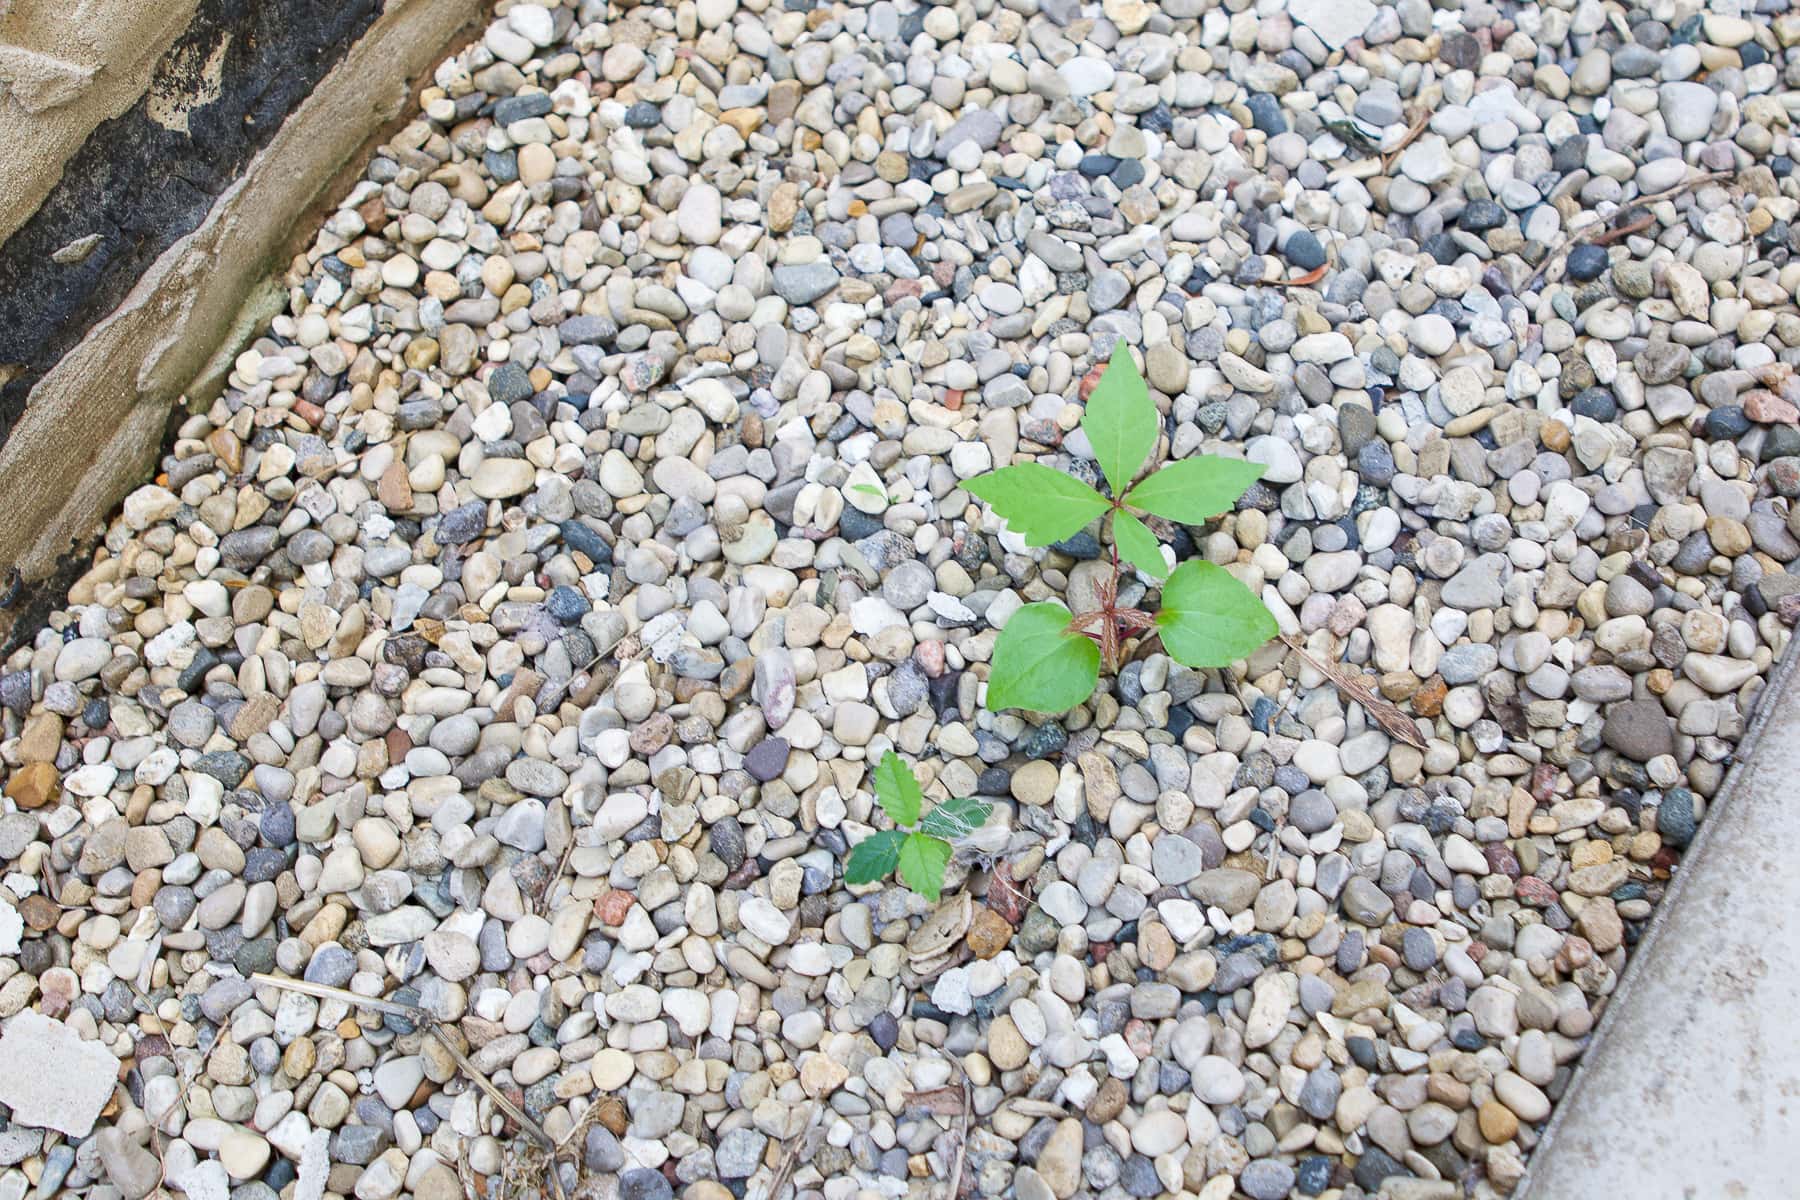 Weeds coming through the pea gravel